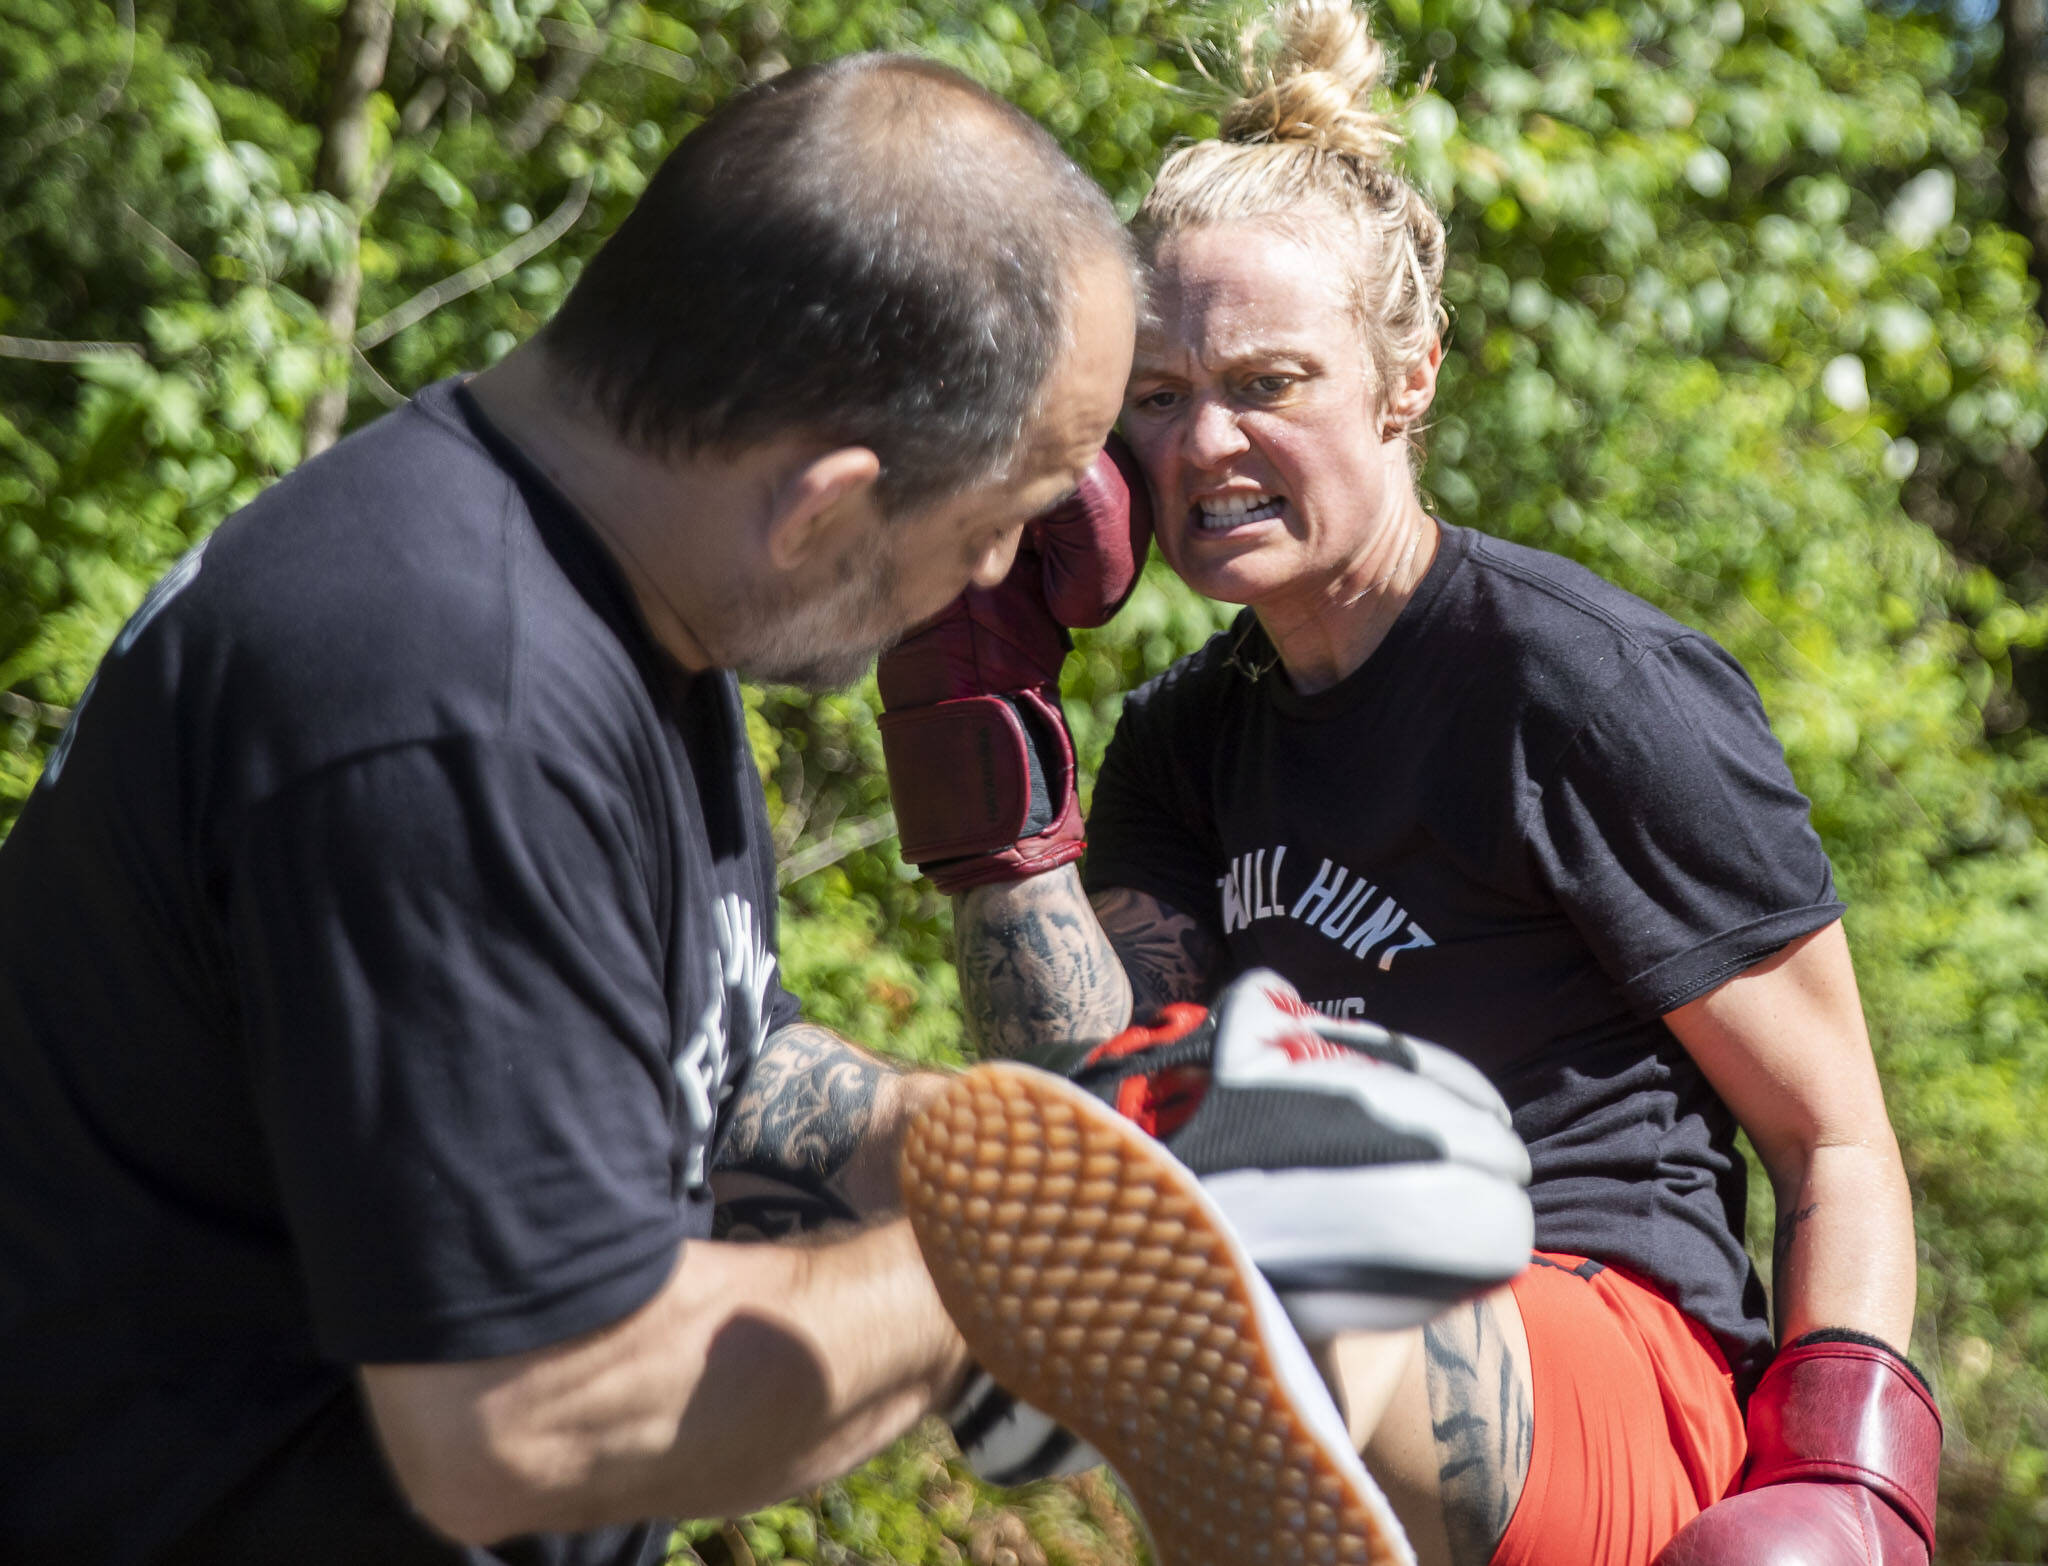 Scowling, Miranda Granger hits a round kick in one of her final training sessions on Tuesday, July 12, 2022, weeks before she headed to Las Vegas for a UFC fight. (Olivia Vanni / The Herald)